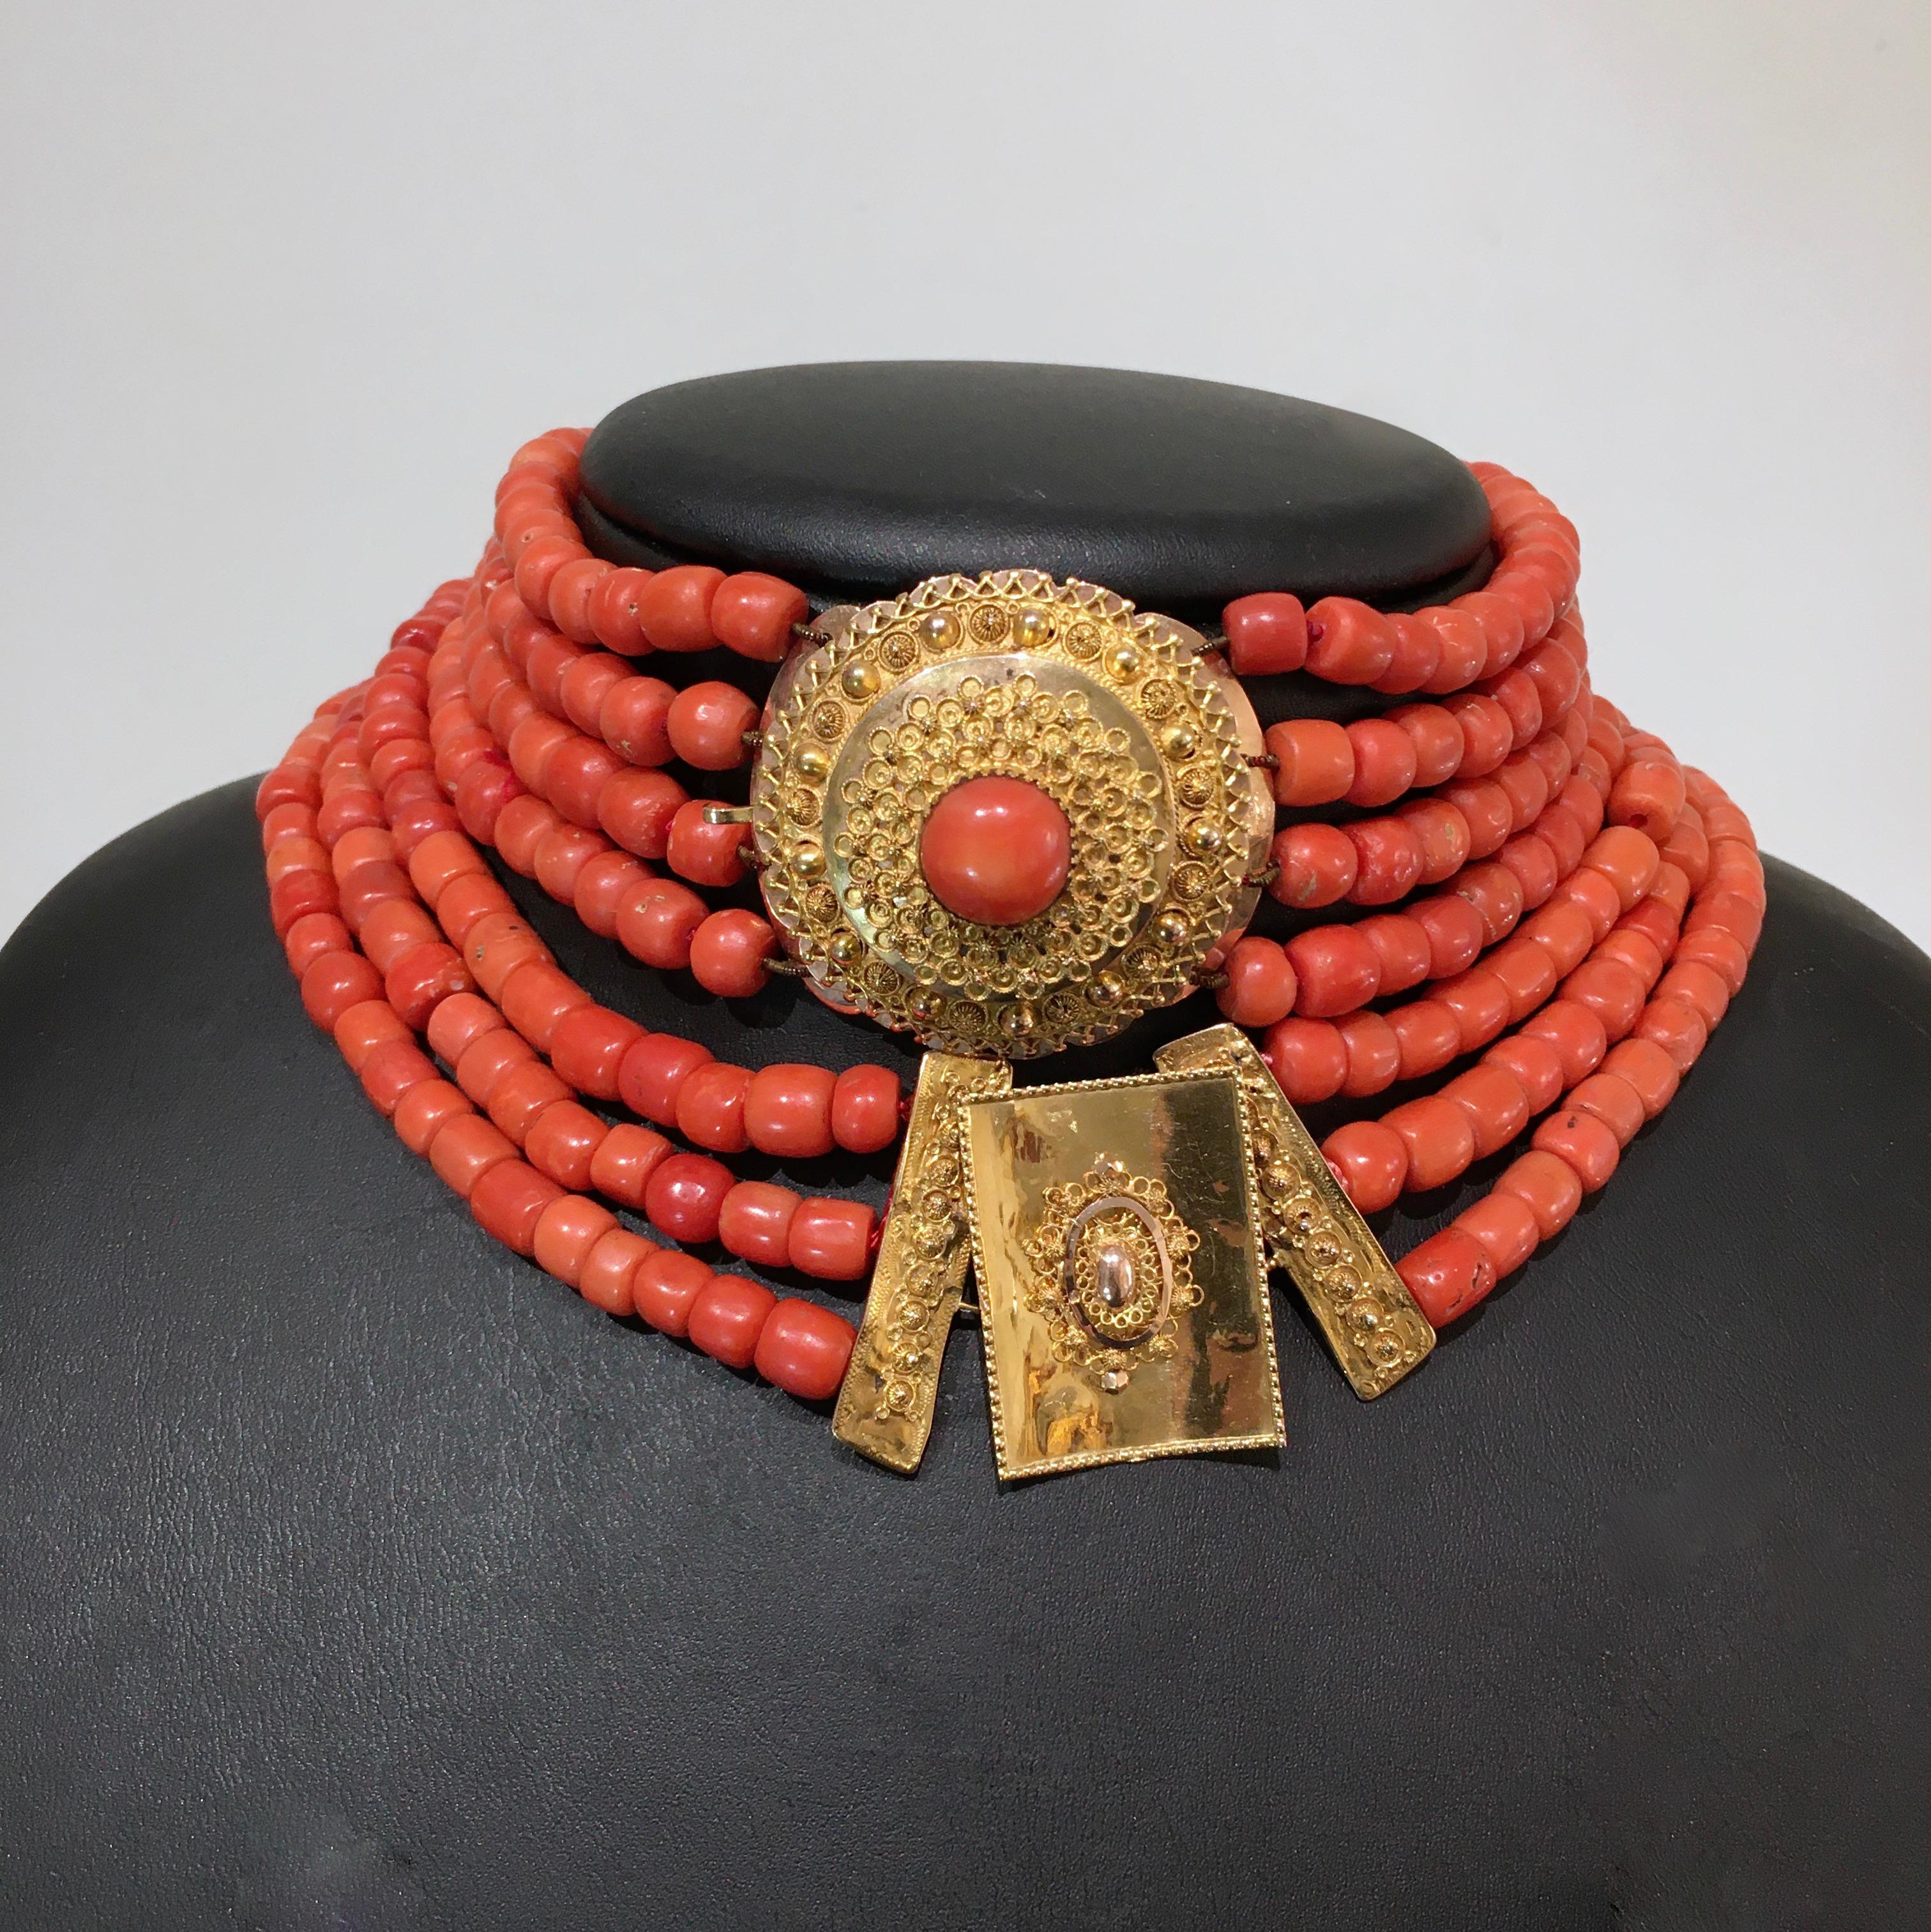 Women's Antique Coral, Necklace, Gold, 1880, Dutch Costume Jewelry